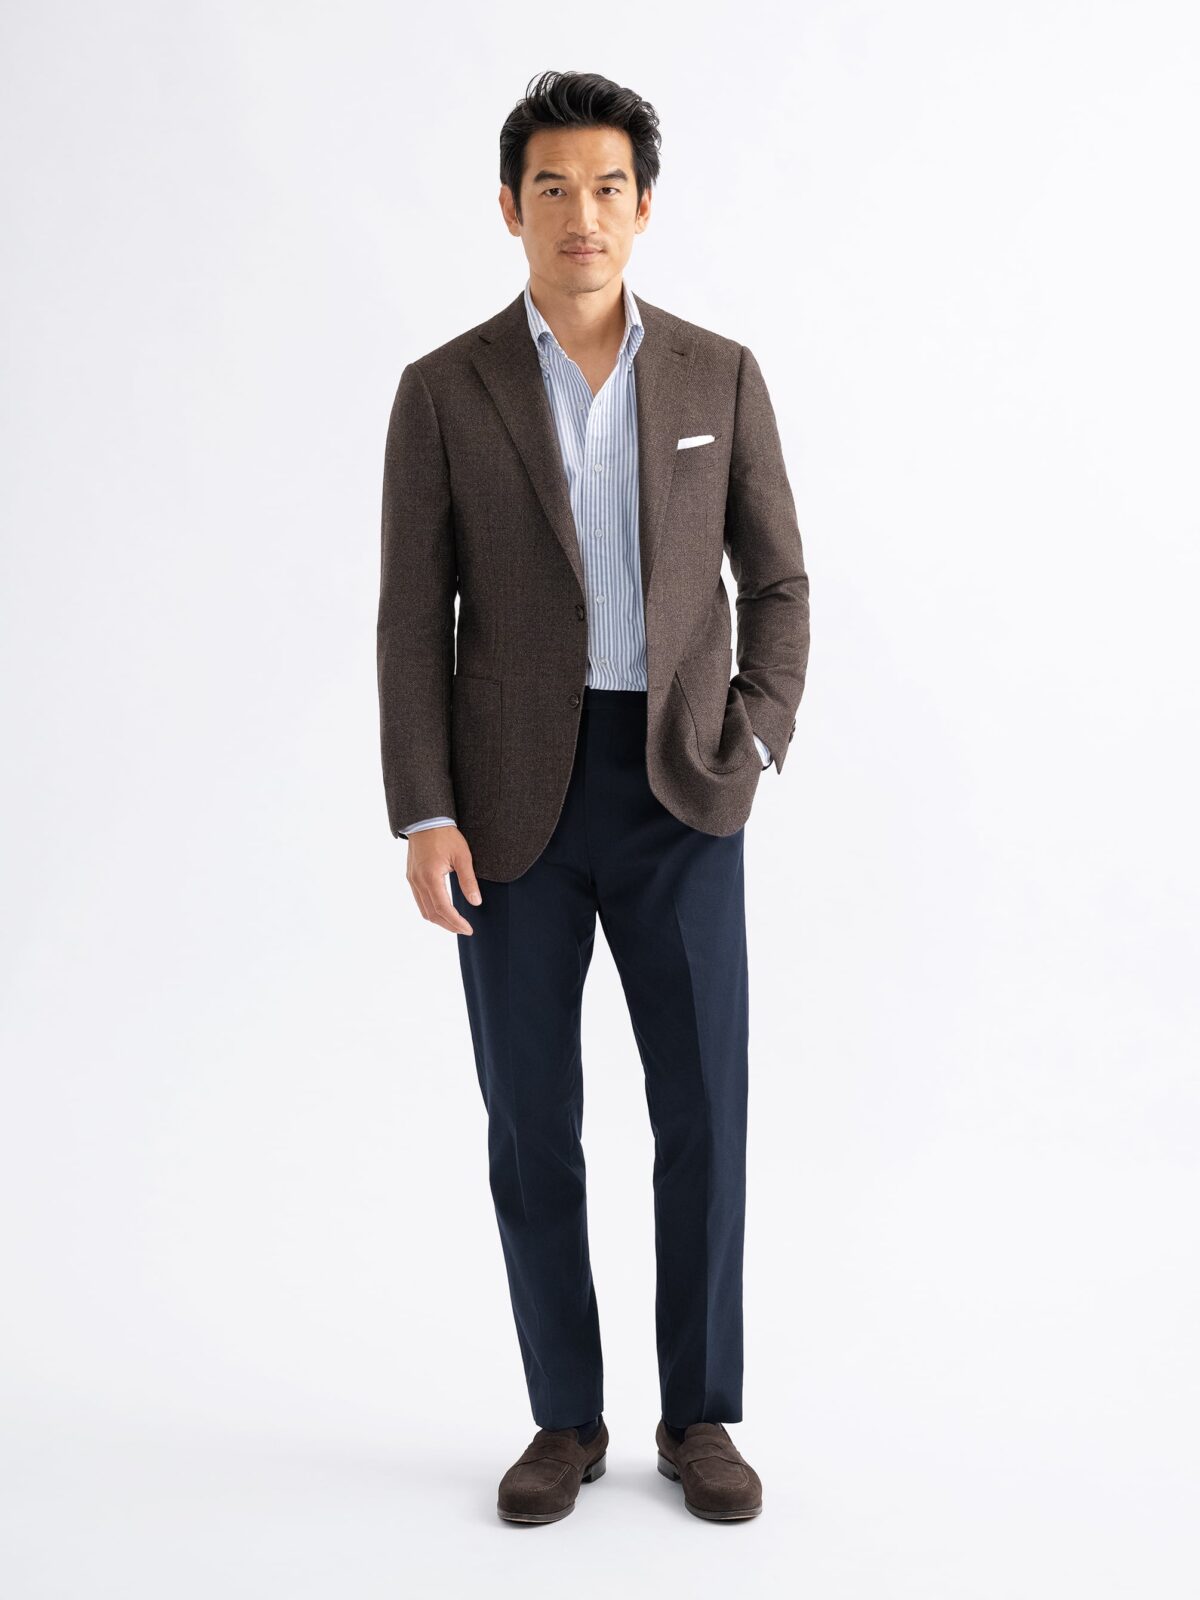 Casual Navy Blazer with Brown Pants